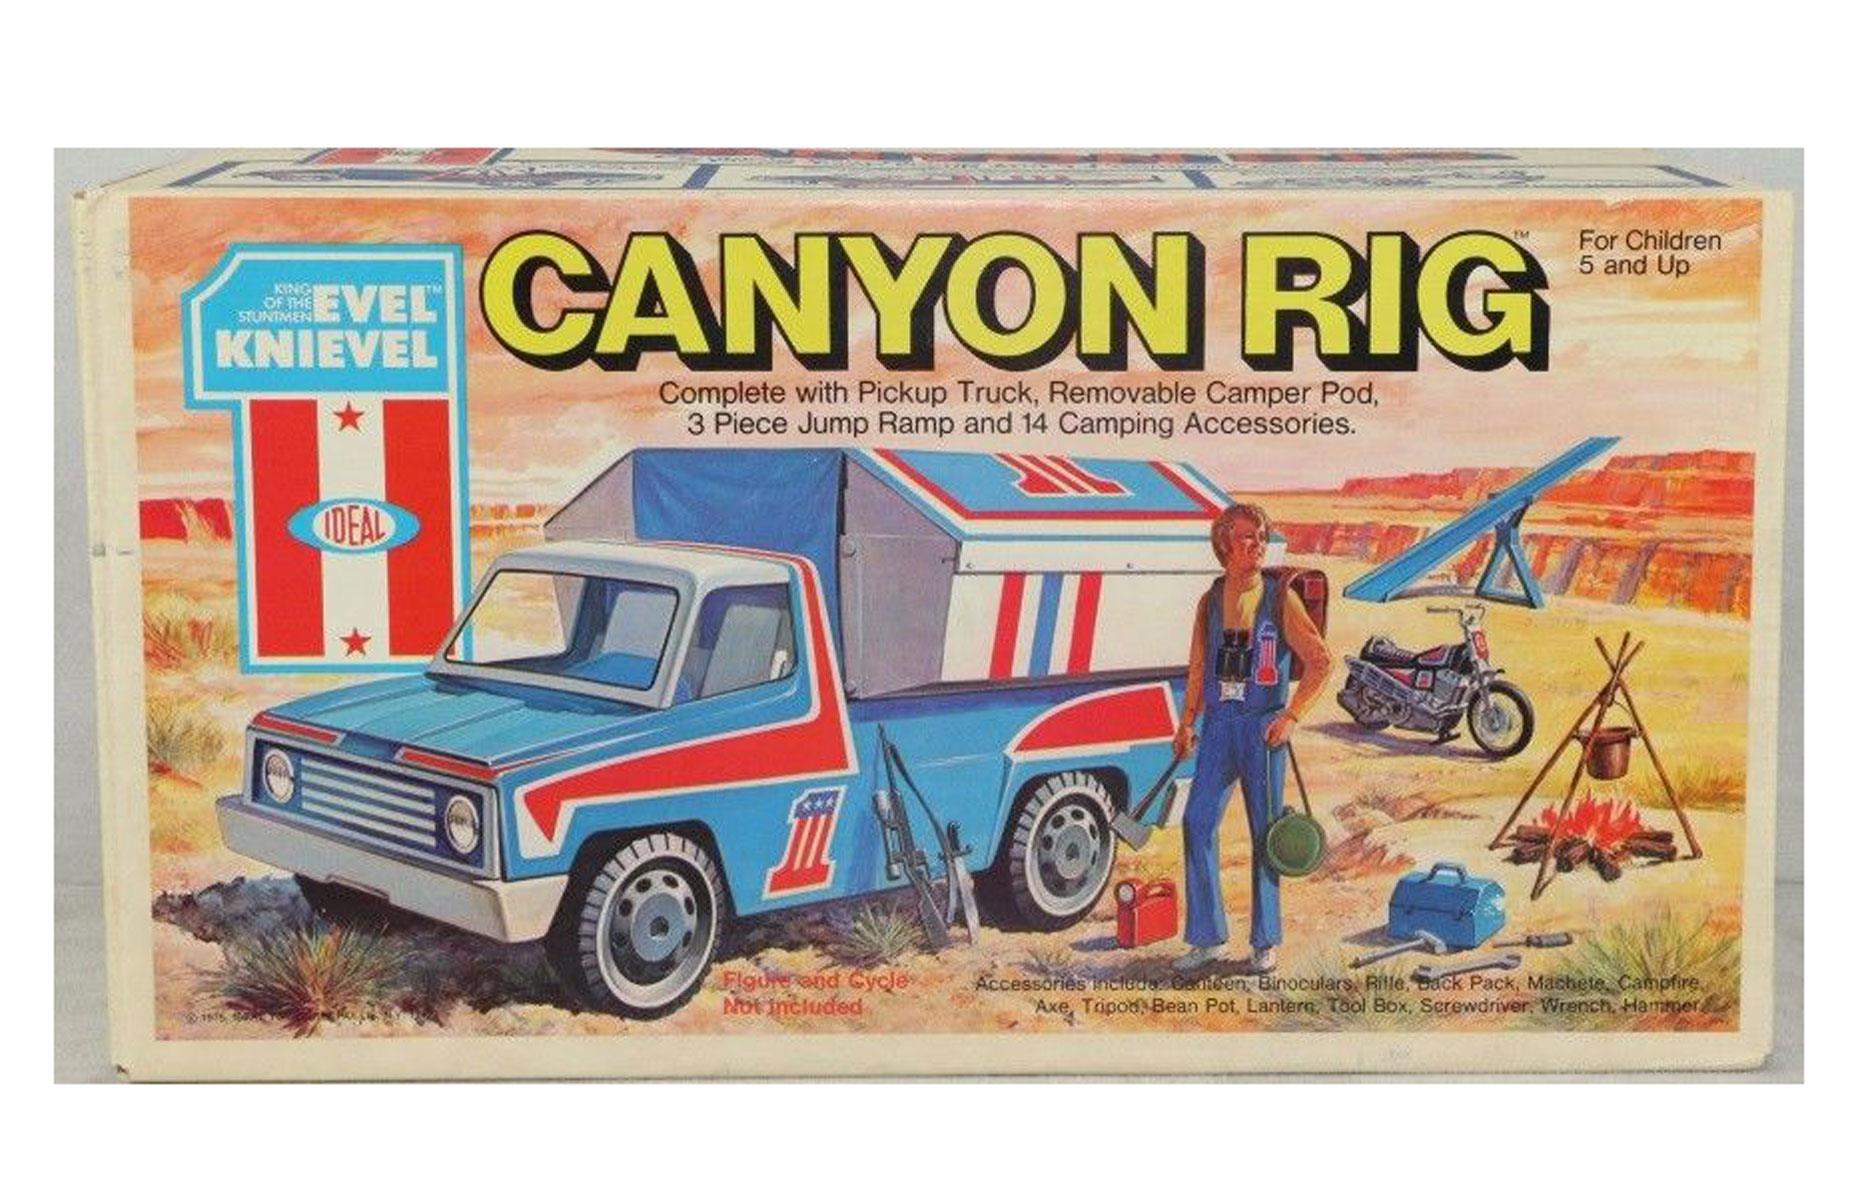 1975 – Ideal Evel Knievel Canyon Rig: $1,600 (£1.2k)